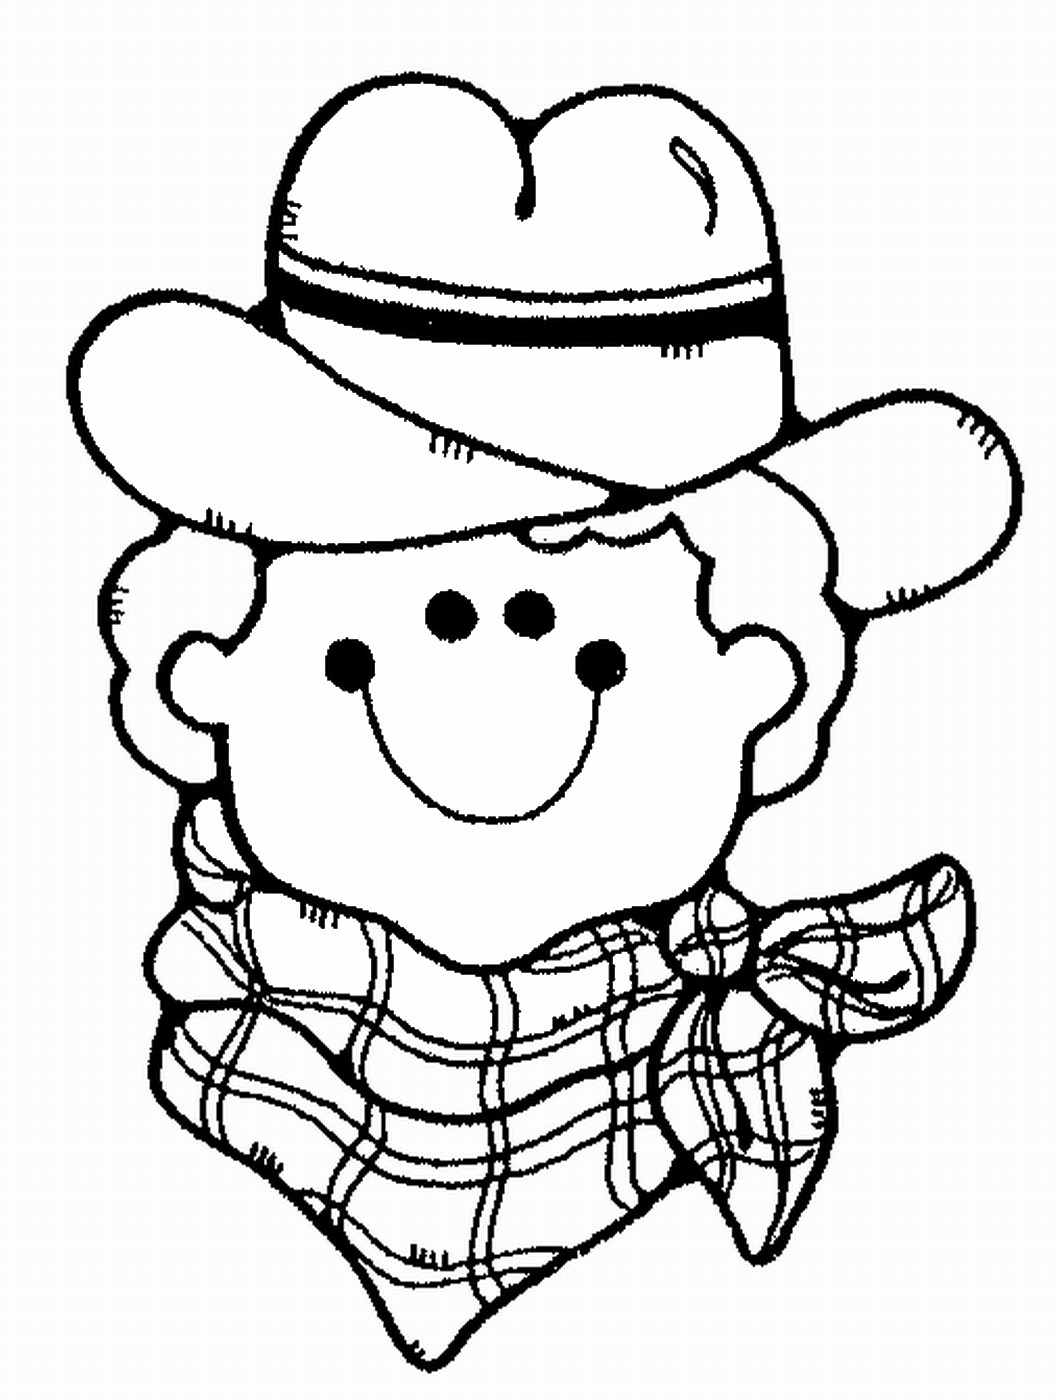 21 Of the Best Ideas for Printable Cowboy Coloring Pages – Home, Family ...